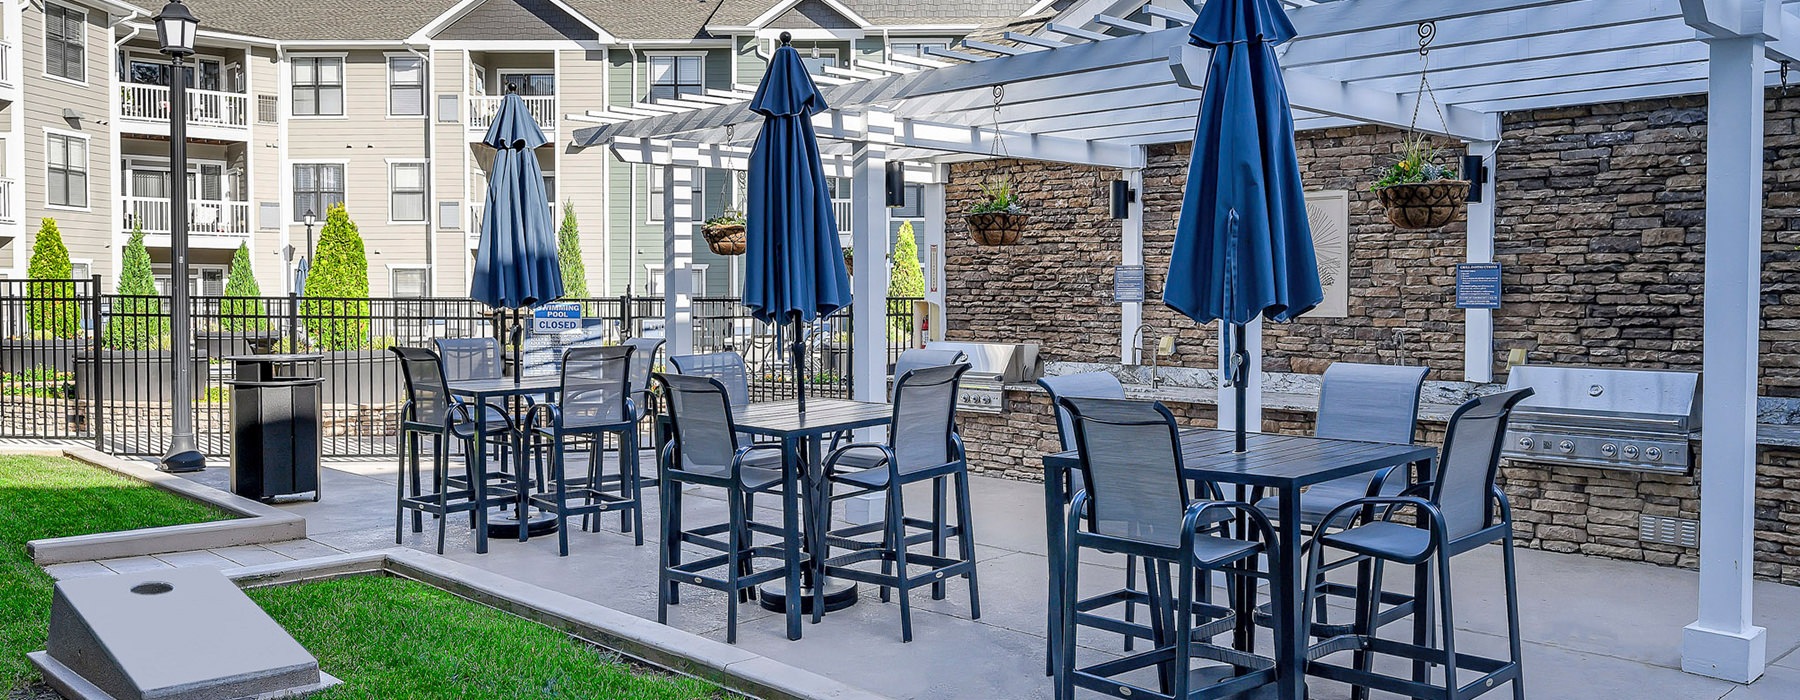 outdoor patio with seating 